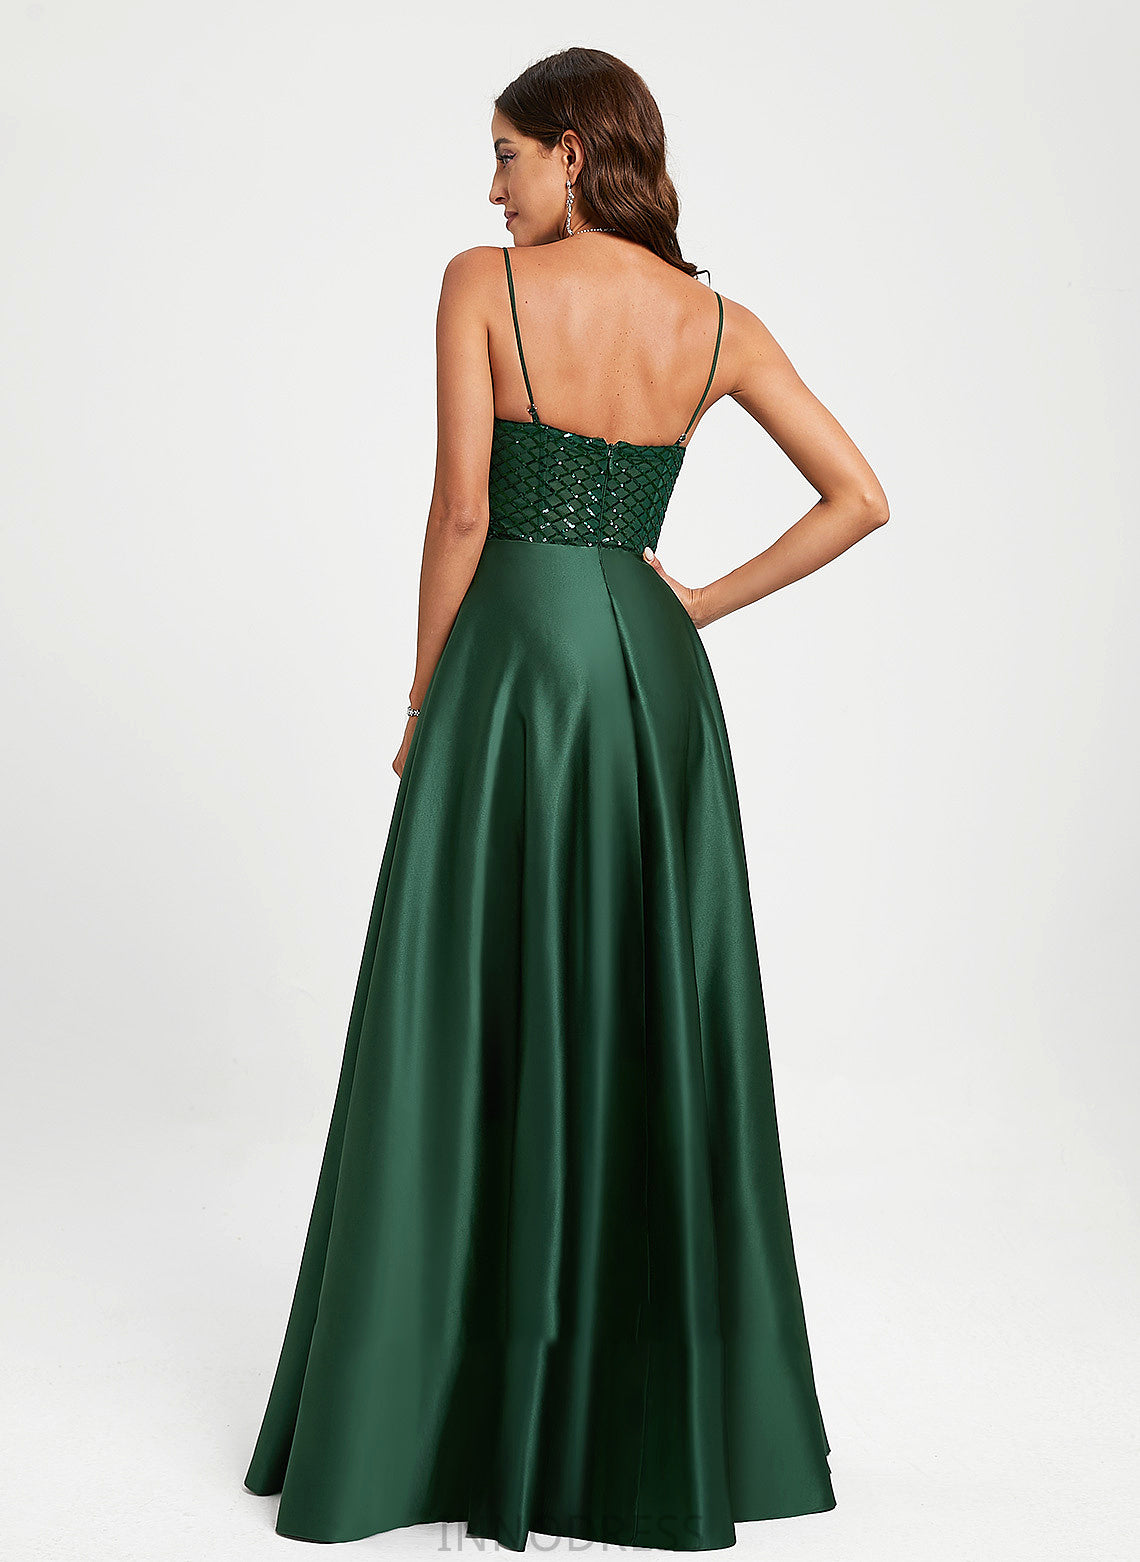 Prom Dresses Charlie A-Line Floor-Length Sweetheart Satin With Sequins